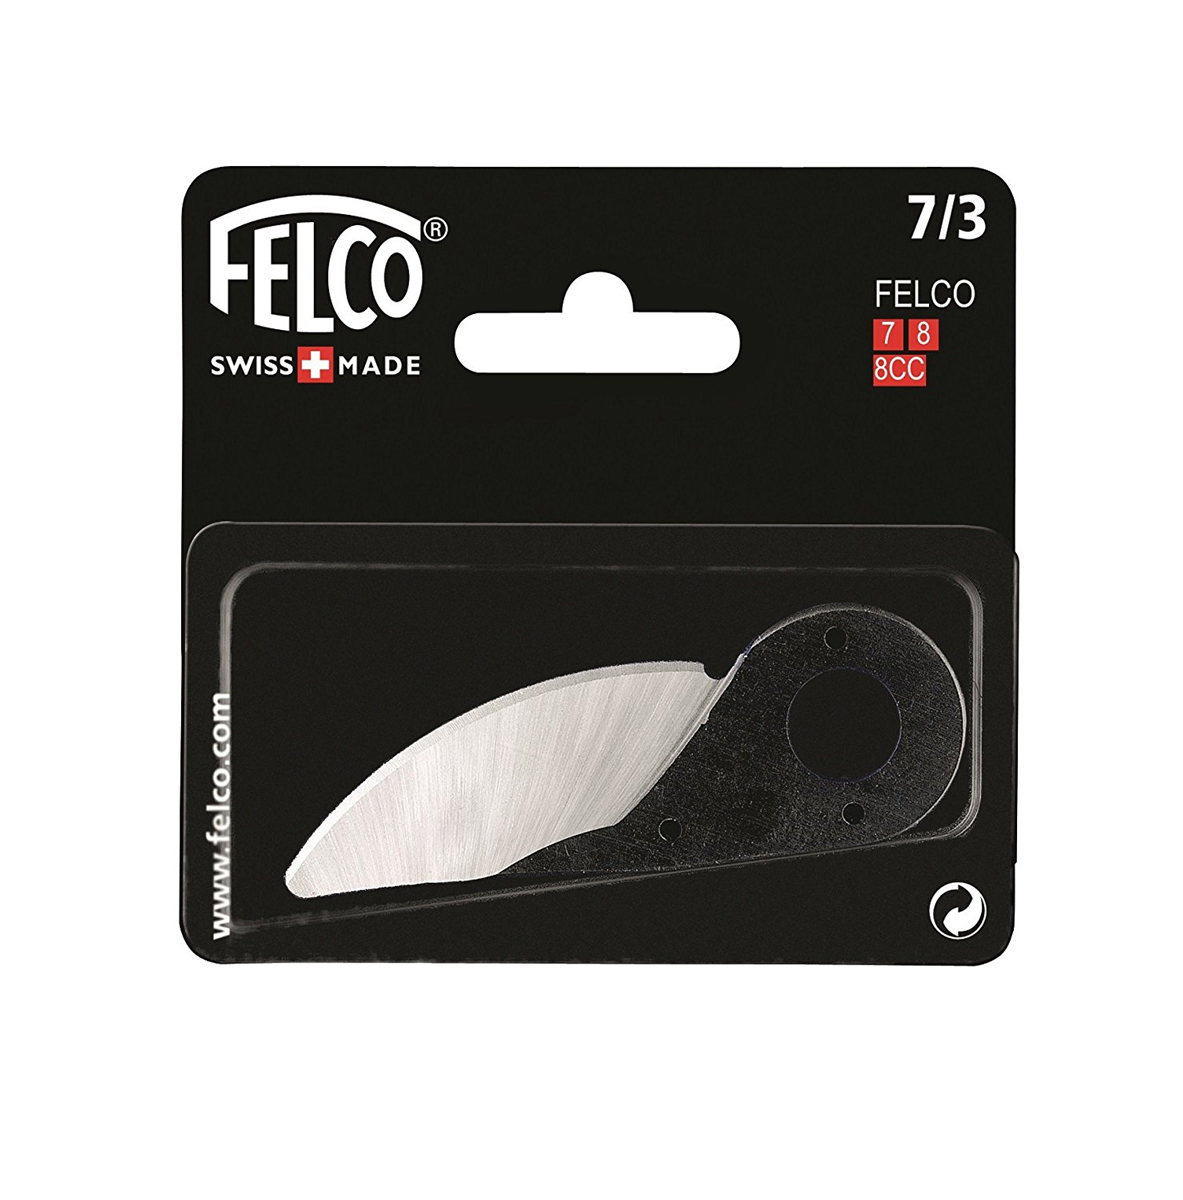 7-3 Cutting Blade for F 7 8 Felco - Hand Tools